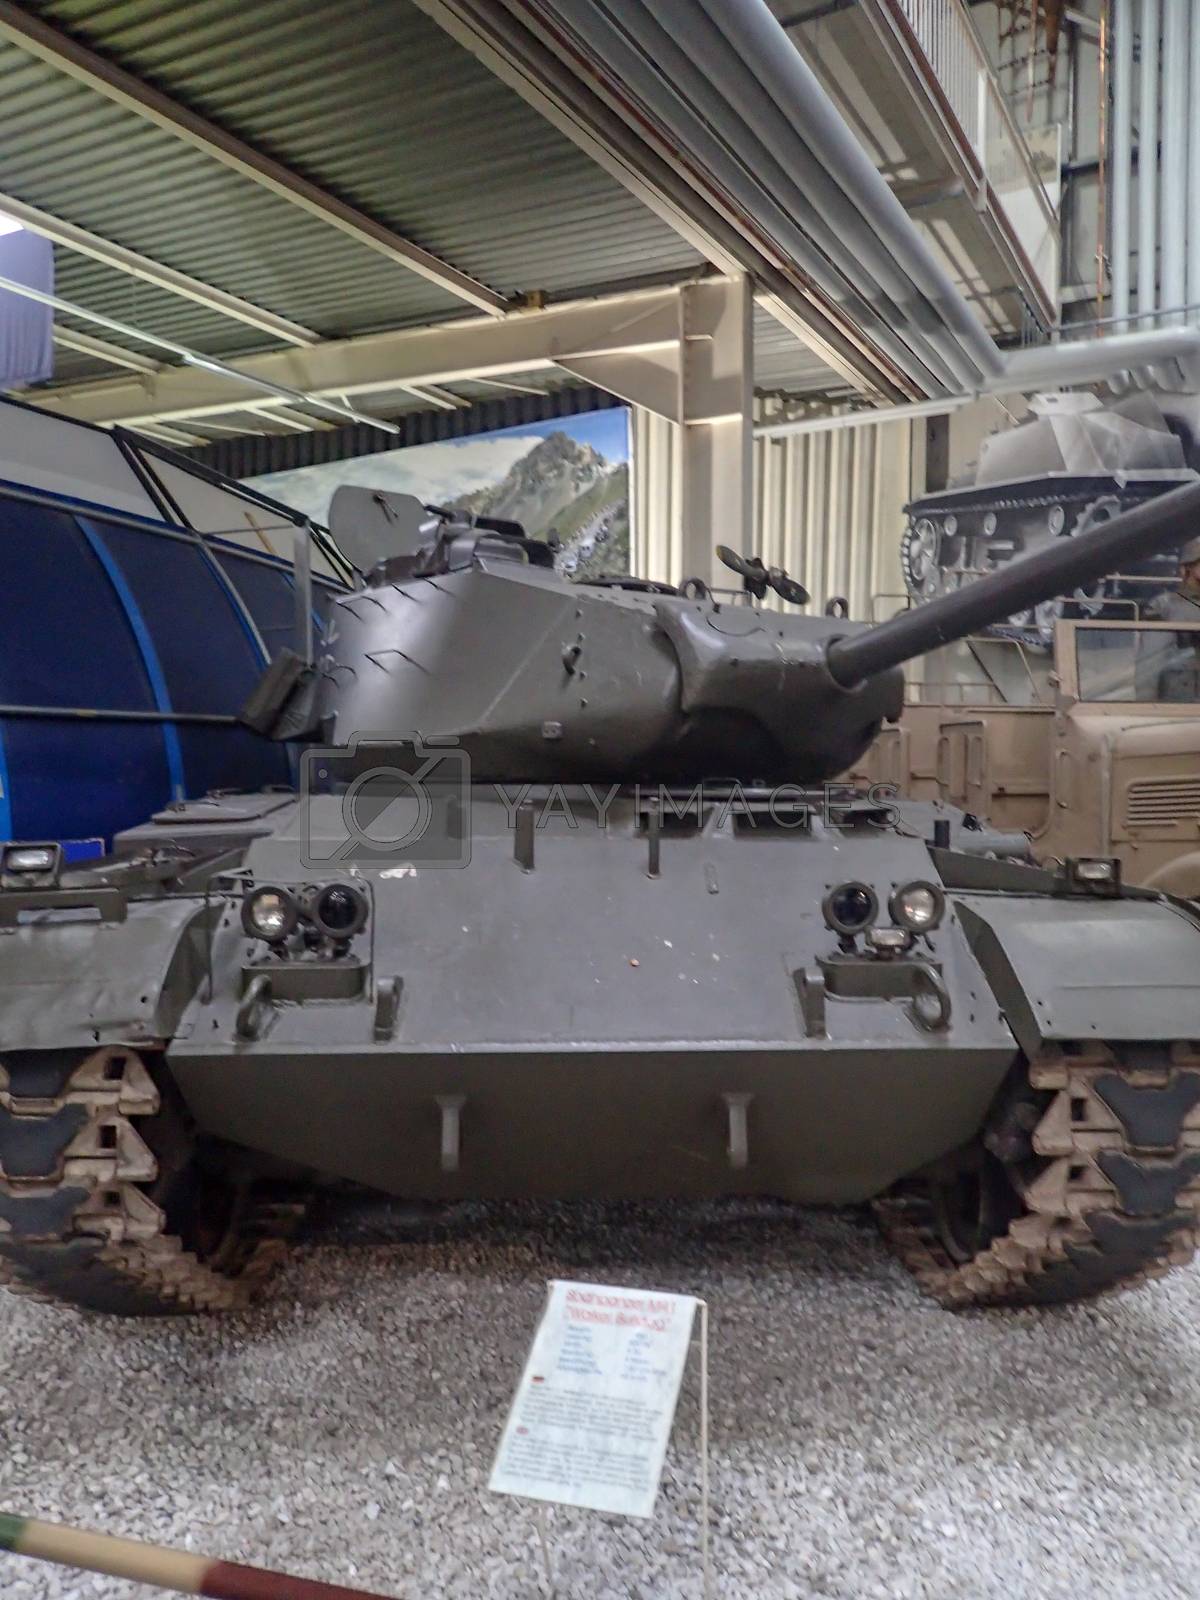 Royalty free image of an old tank from the world war in a museum by Tevion25